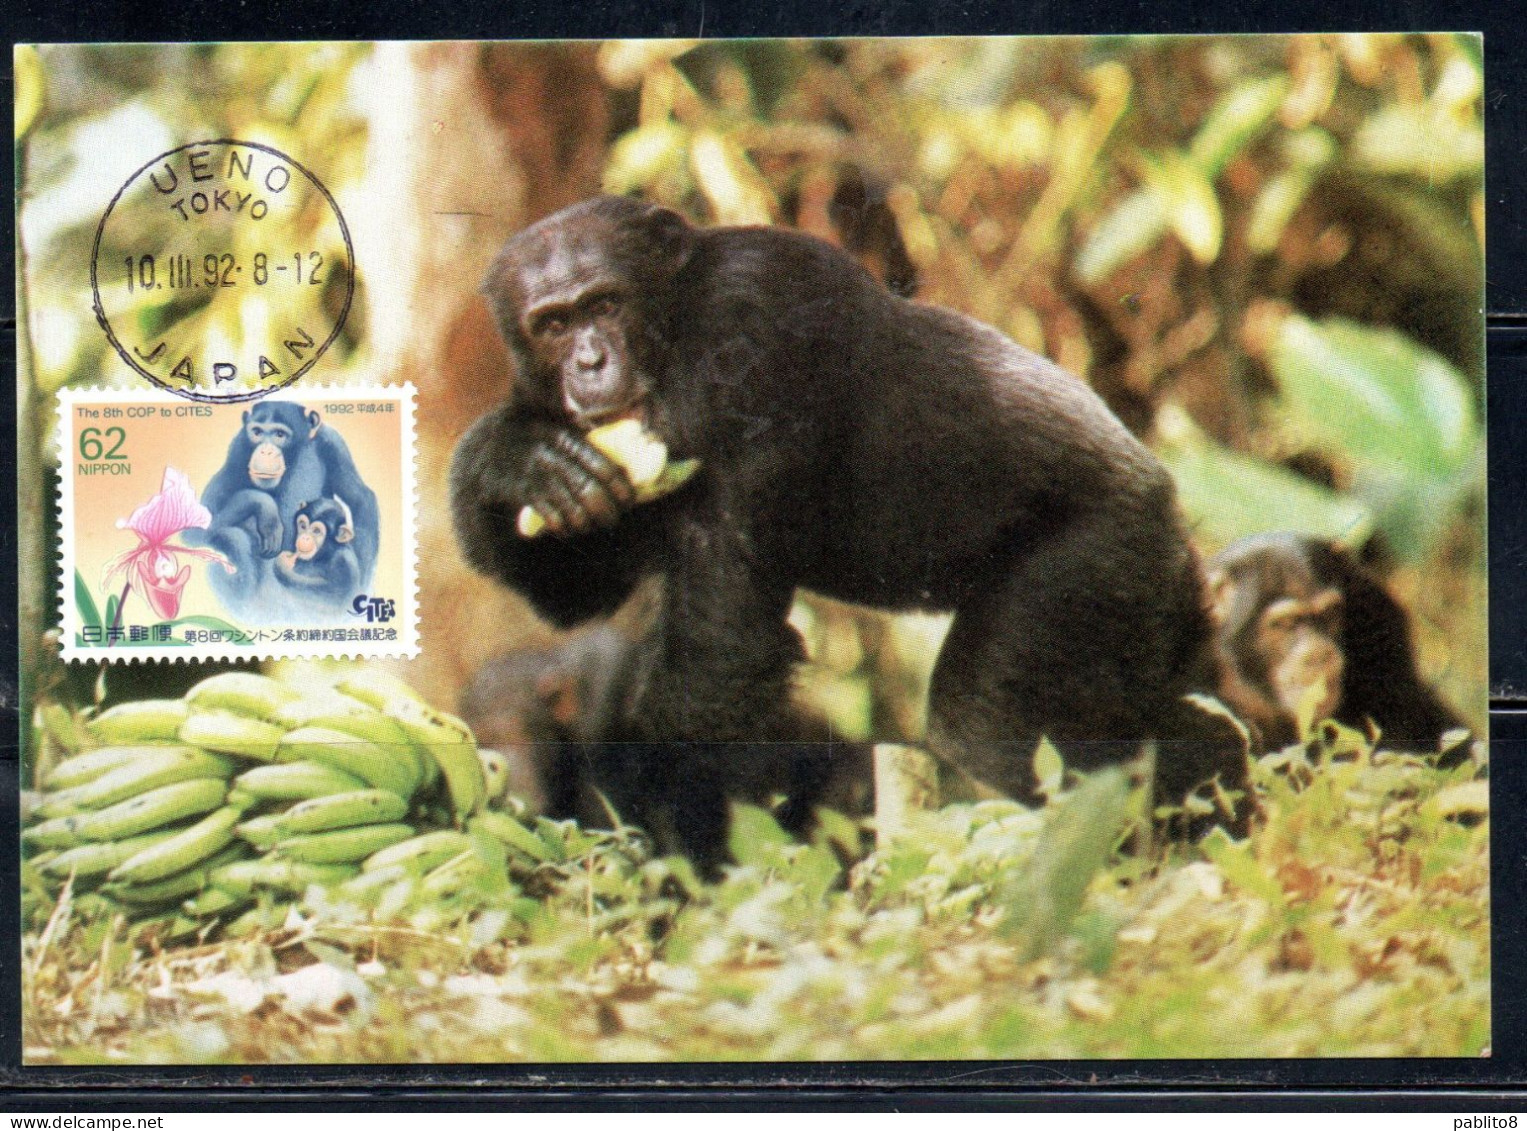 JAPAN GIAPPONE 1992 CONFERENCE ON INTERNATIONAL TRADE IN ENDANGERED SPECIES CITES CHIMPANZEES 62y MAXI MAXIMUM CARD - Maximum Cards